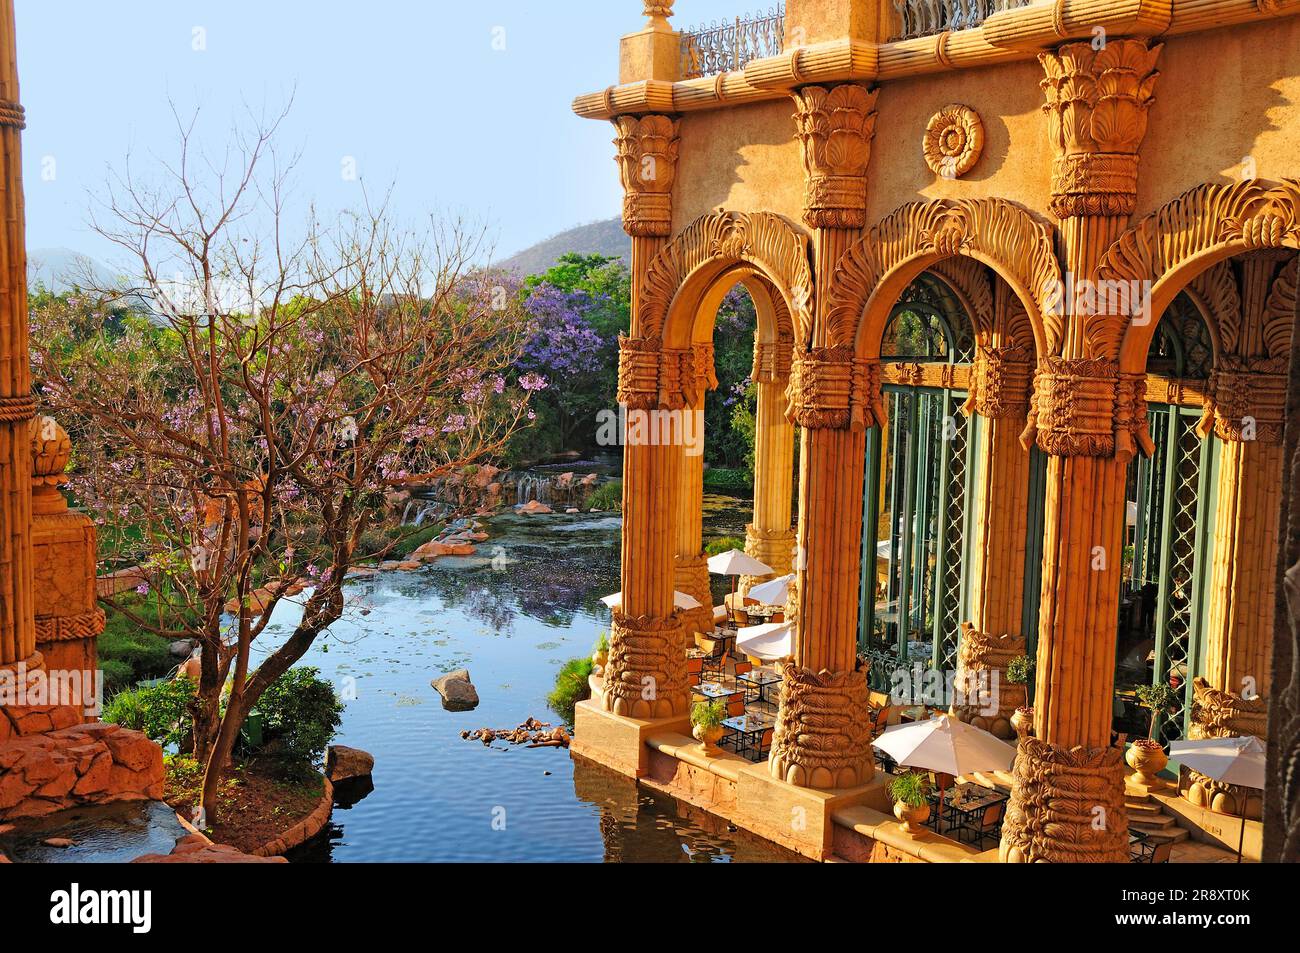 The Palace of the Lost City, Sun City, North West, South Africa Stock Photo